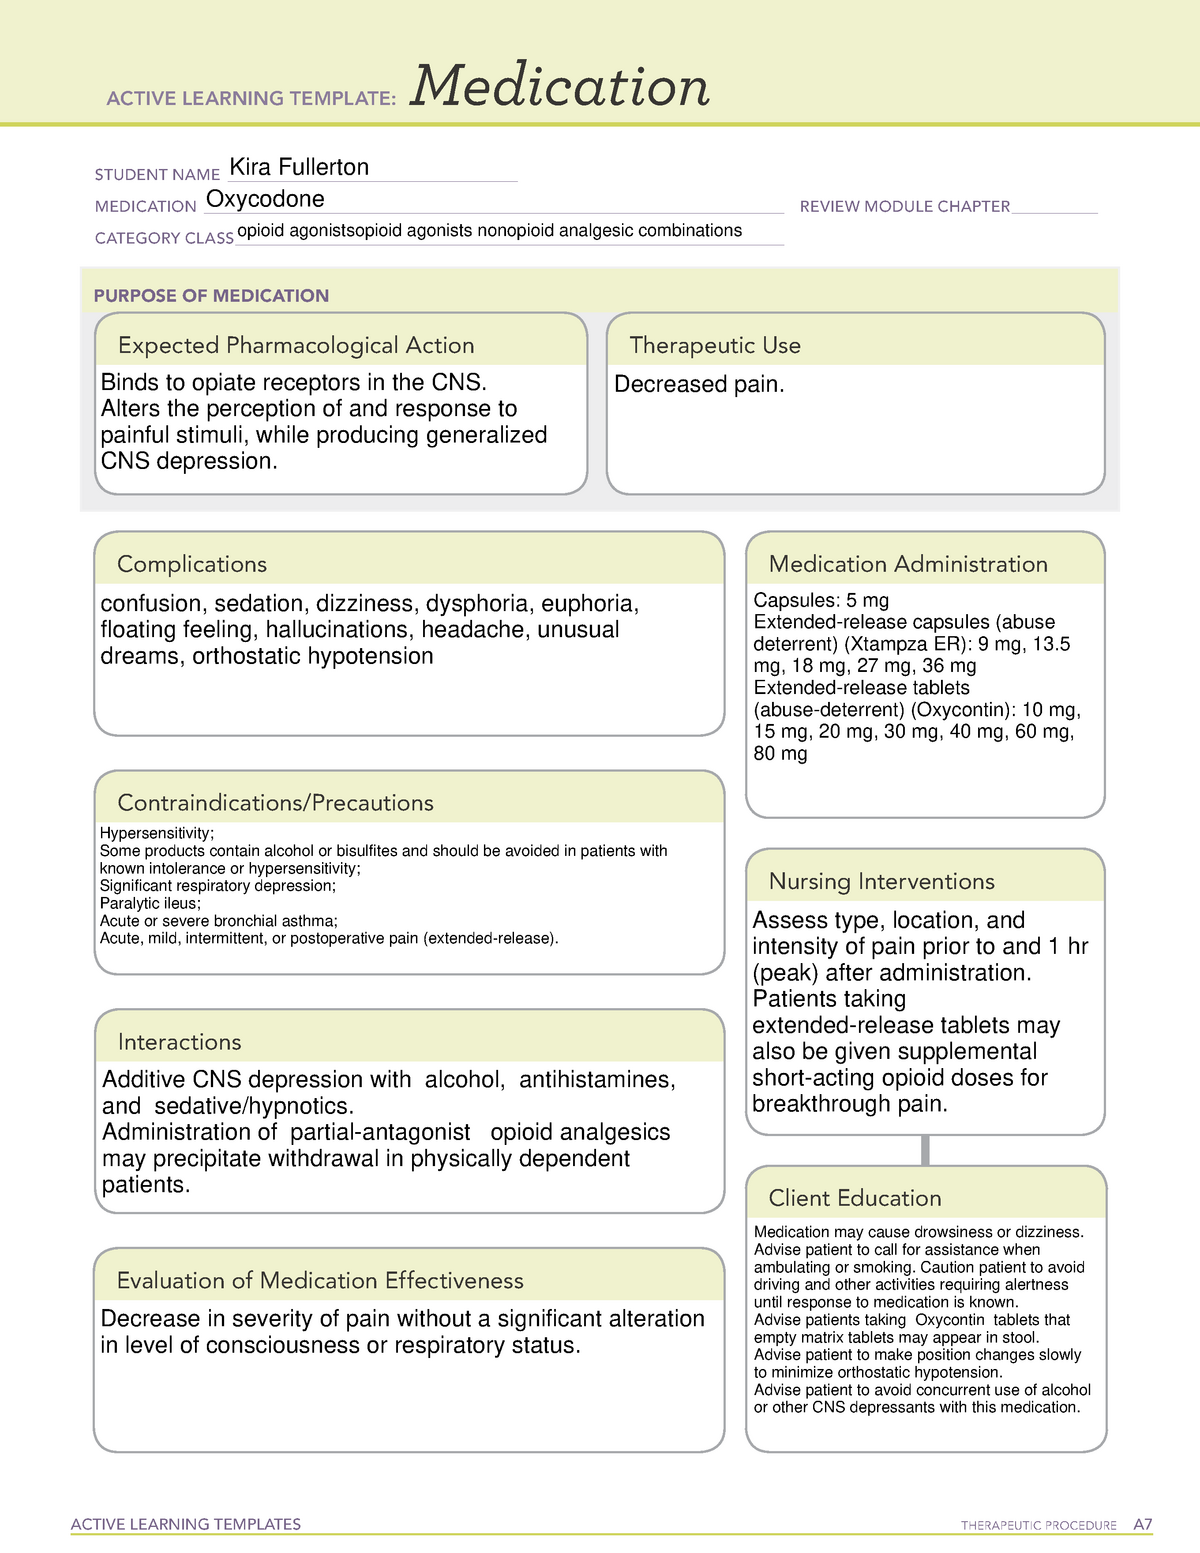 med-oxycodone-ati-medications-sheet-active-learning-templates